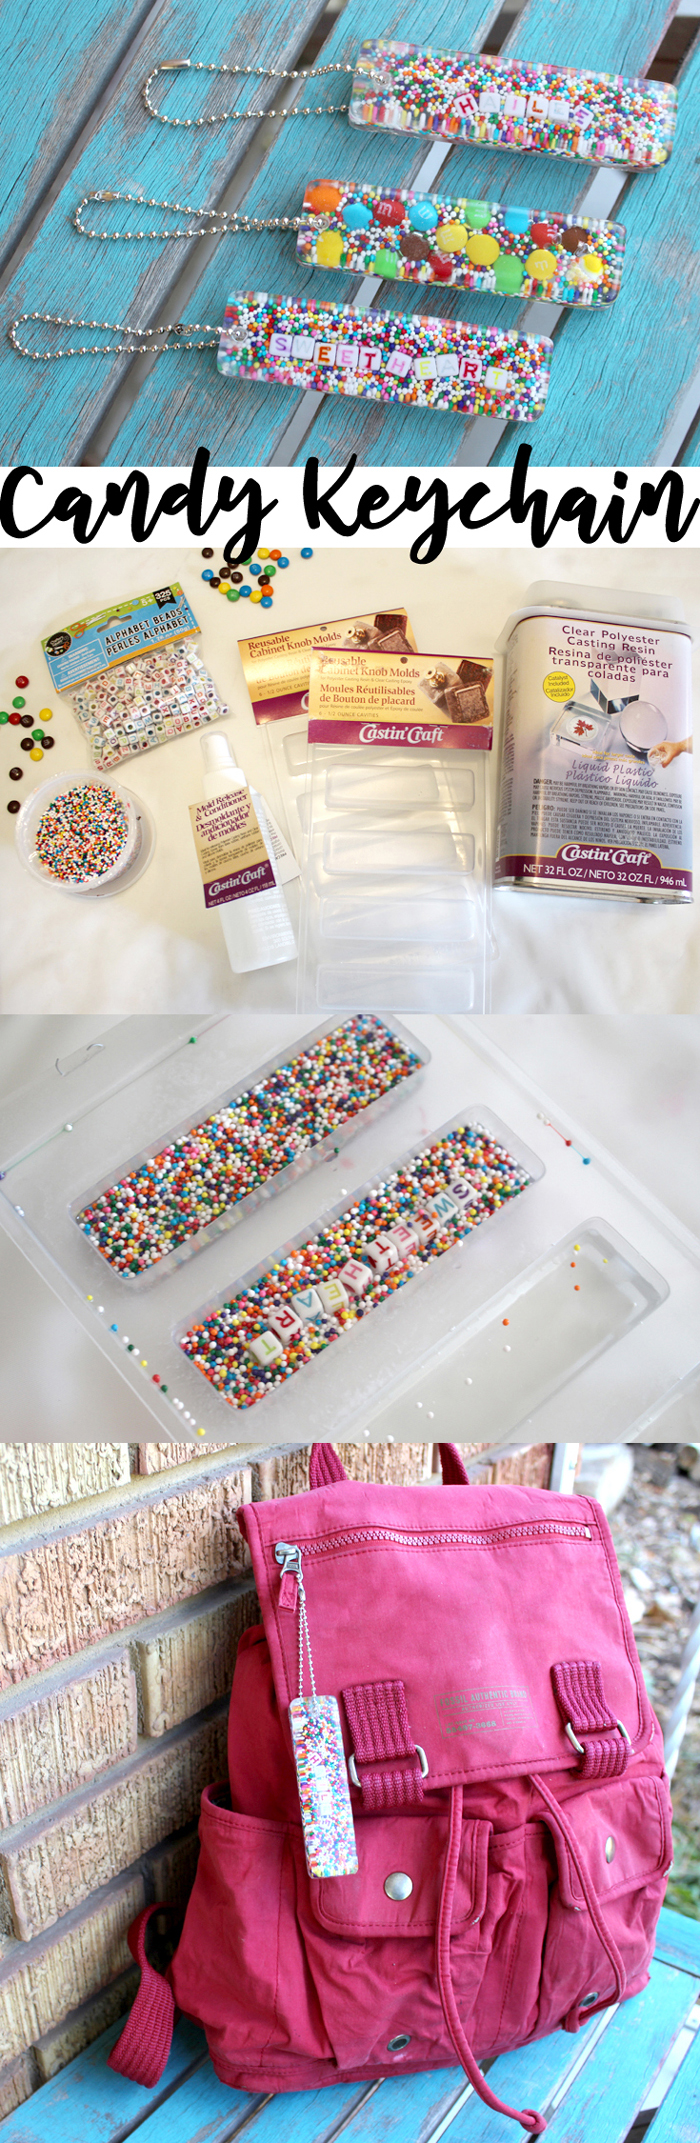 Candy Sprinkles Resin Keychain DIY!  These keychains can be customized and make the perfect handmade gift for the holidays. via @resincraftsblog